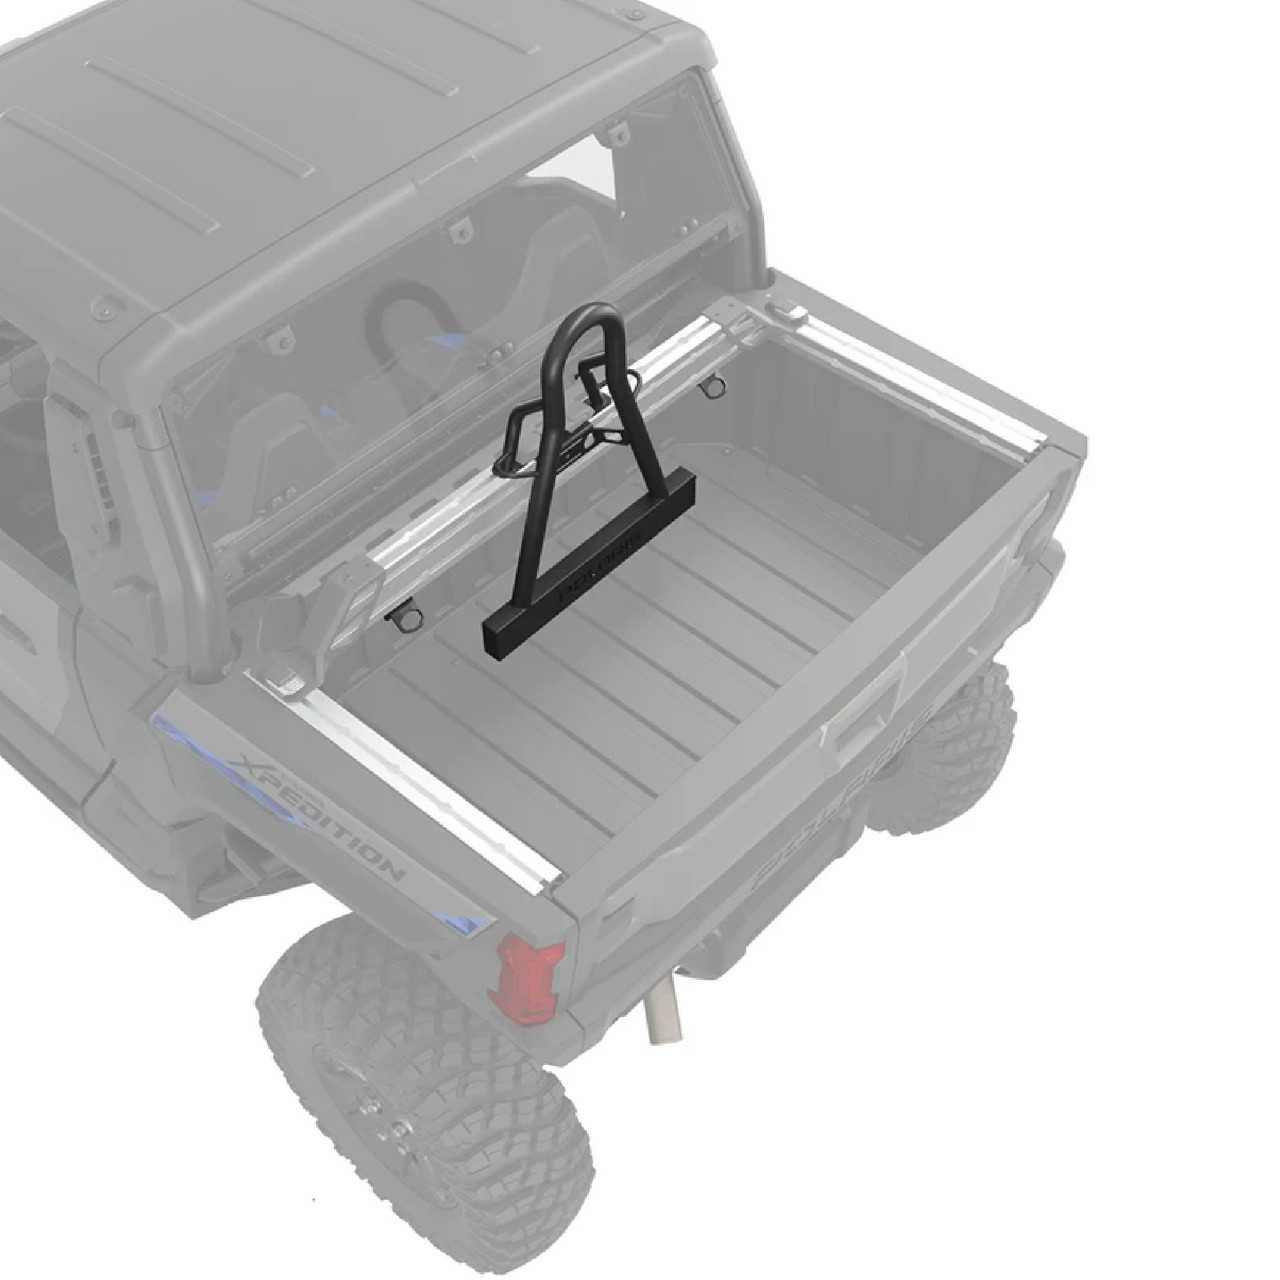 Polaris New OEM, Toolless Install Lock & Ride MAX Spare Tire Carrier 2889336-458